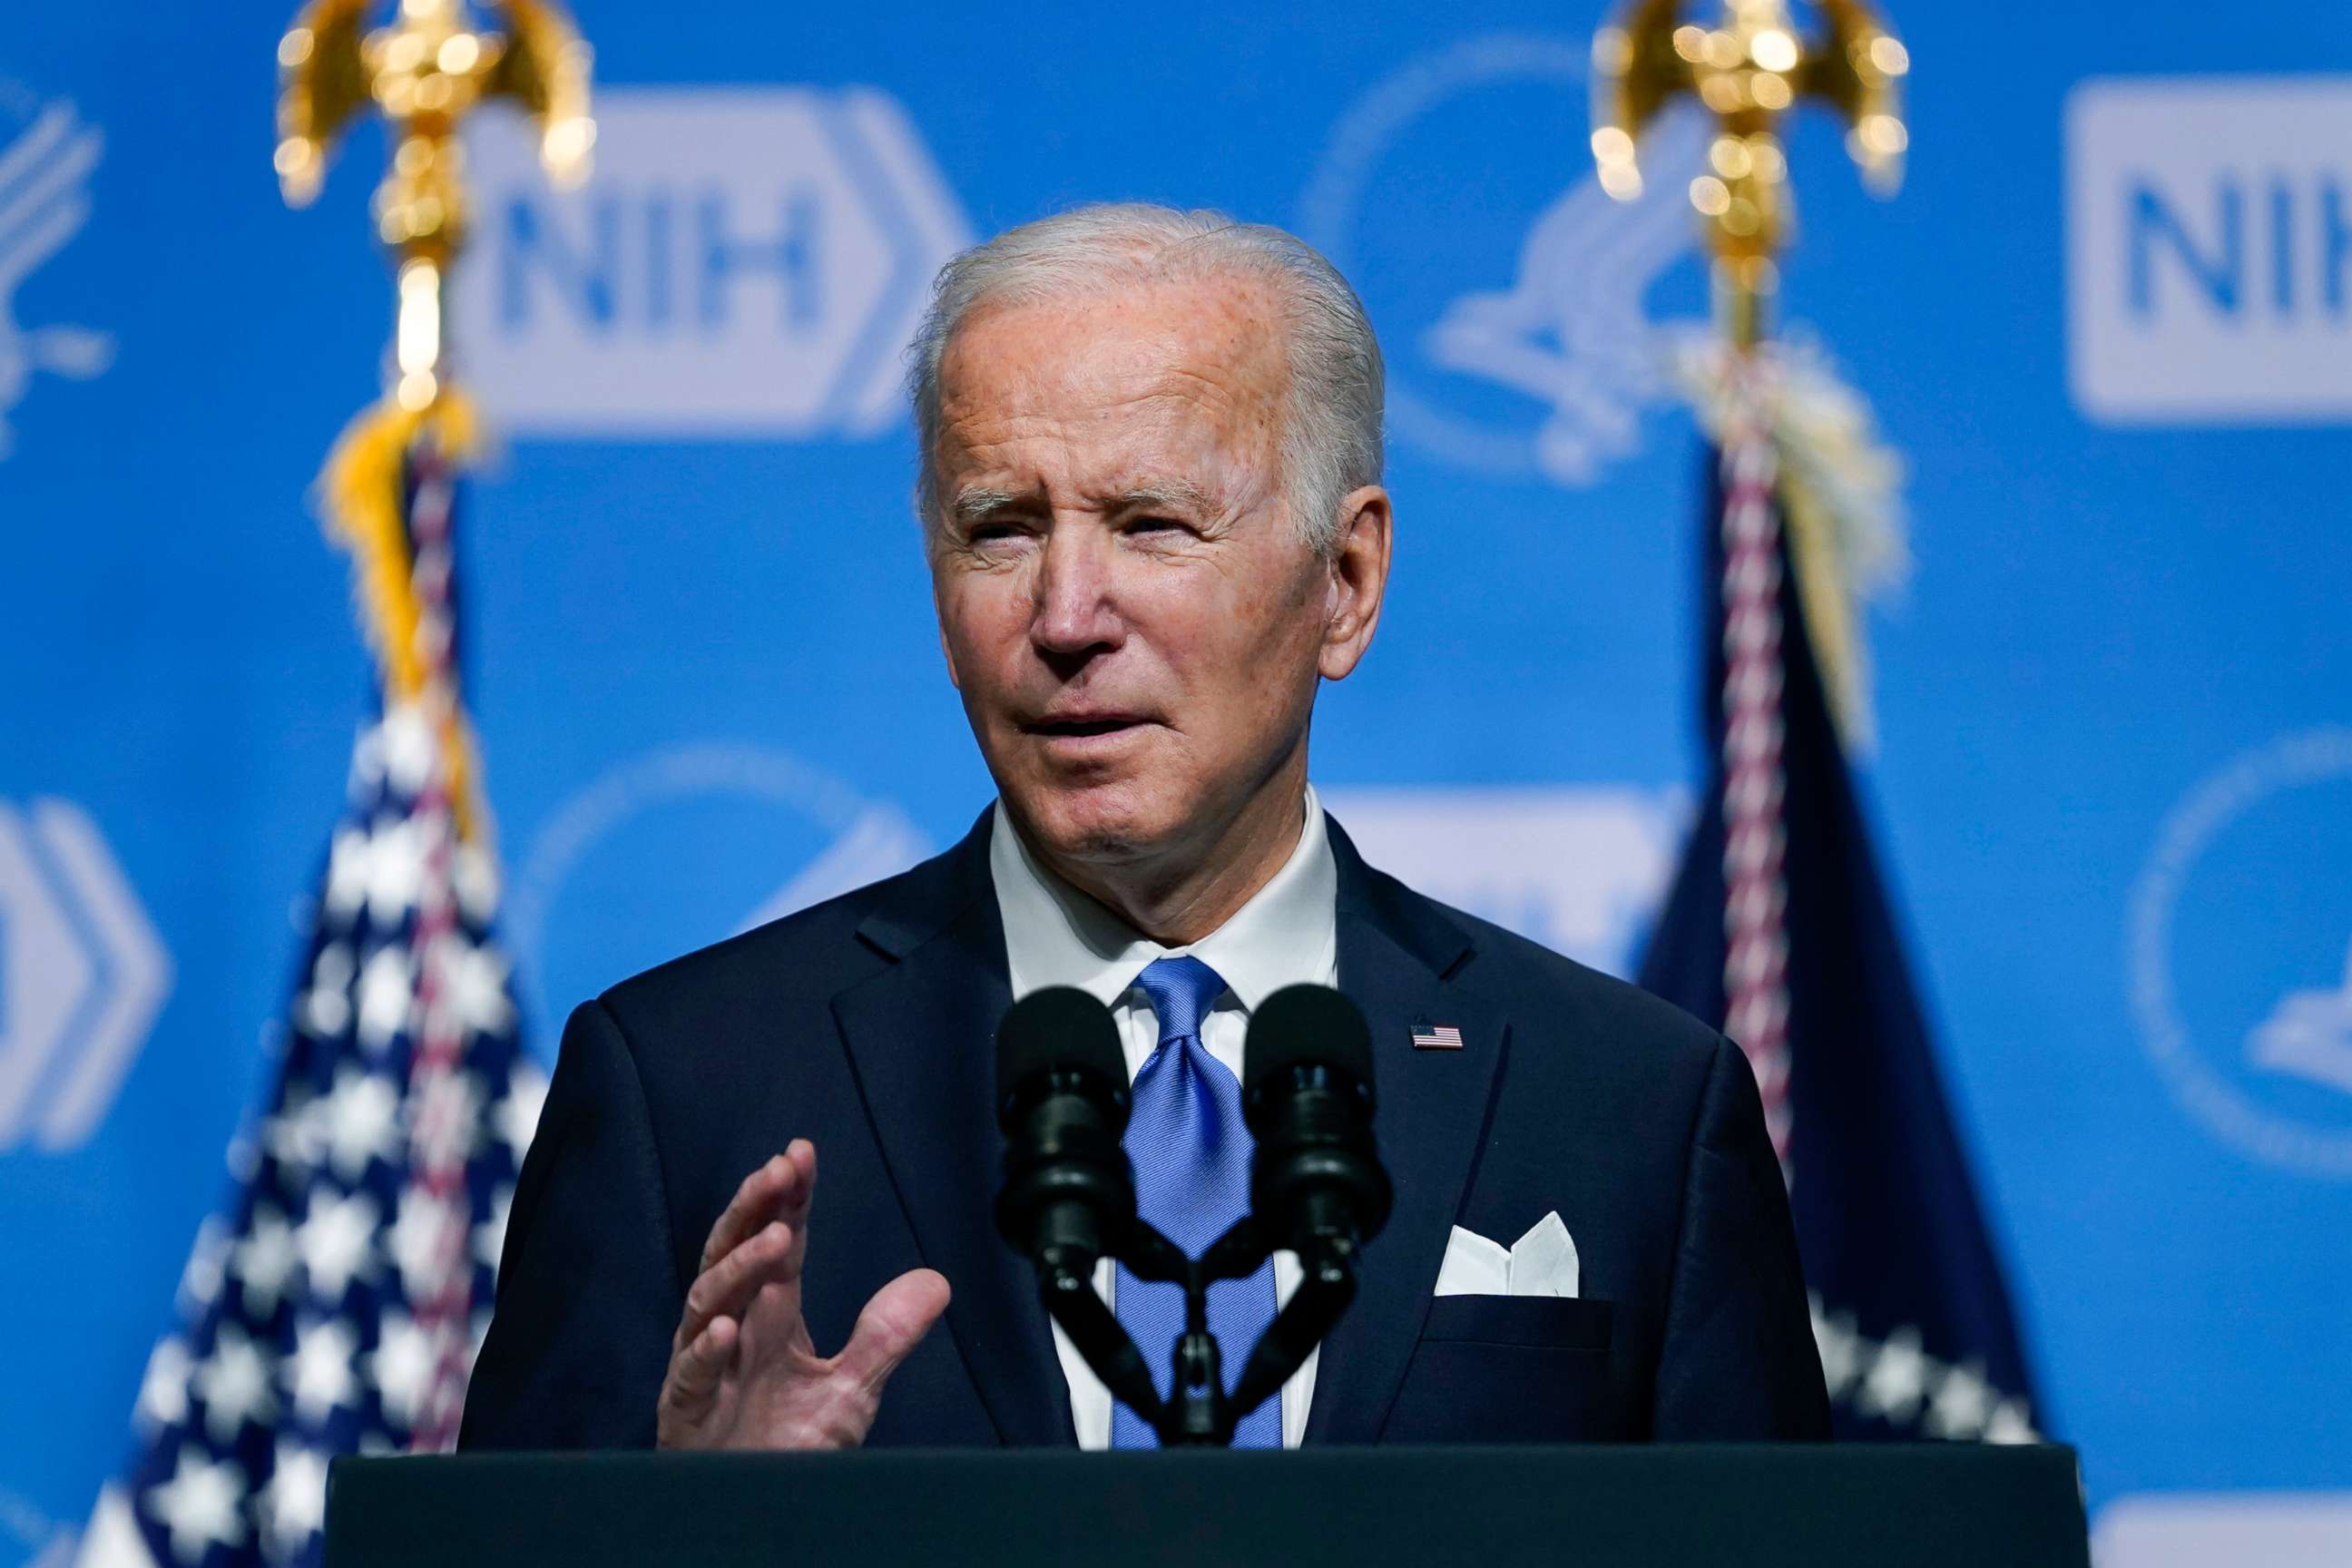 PHOTO: President Joe Biden speaks about the COVID-19 variant named omicron during a visit to the National Institutes of Health, Dec. 2, 2021, in Bethesda, Md.